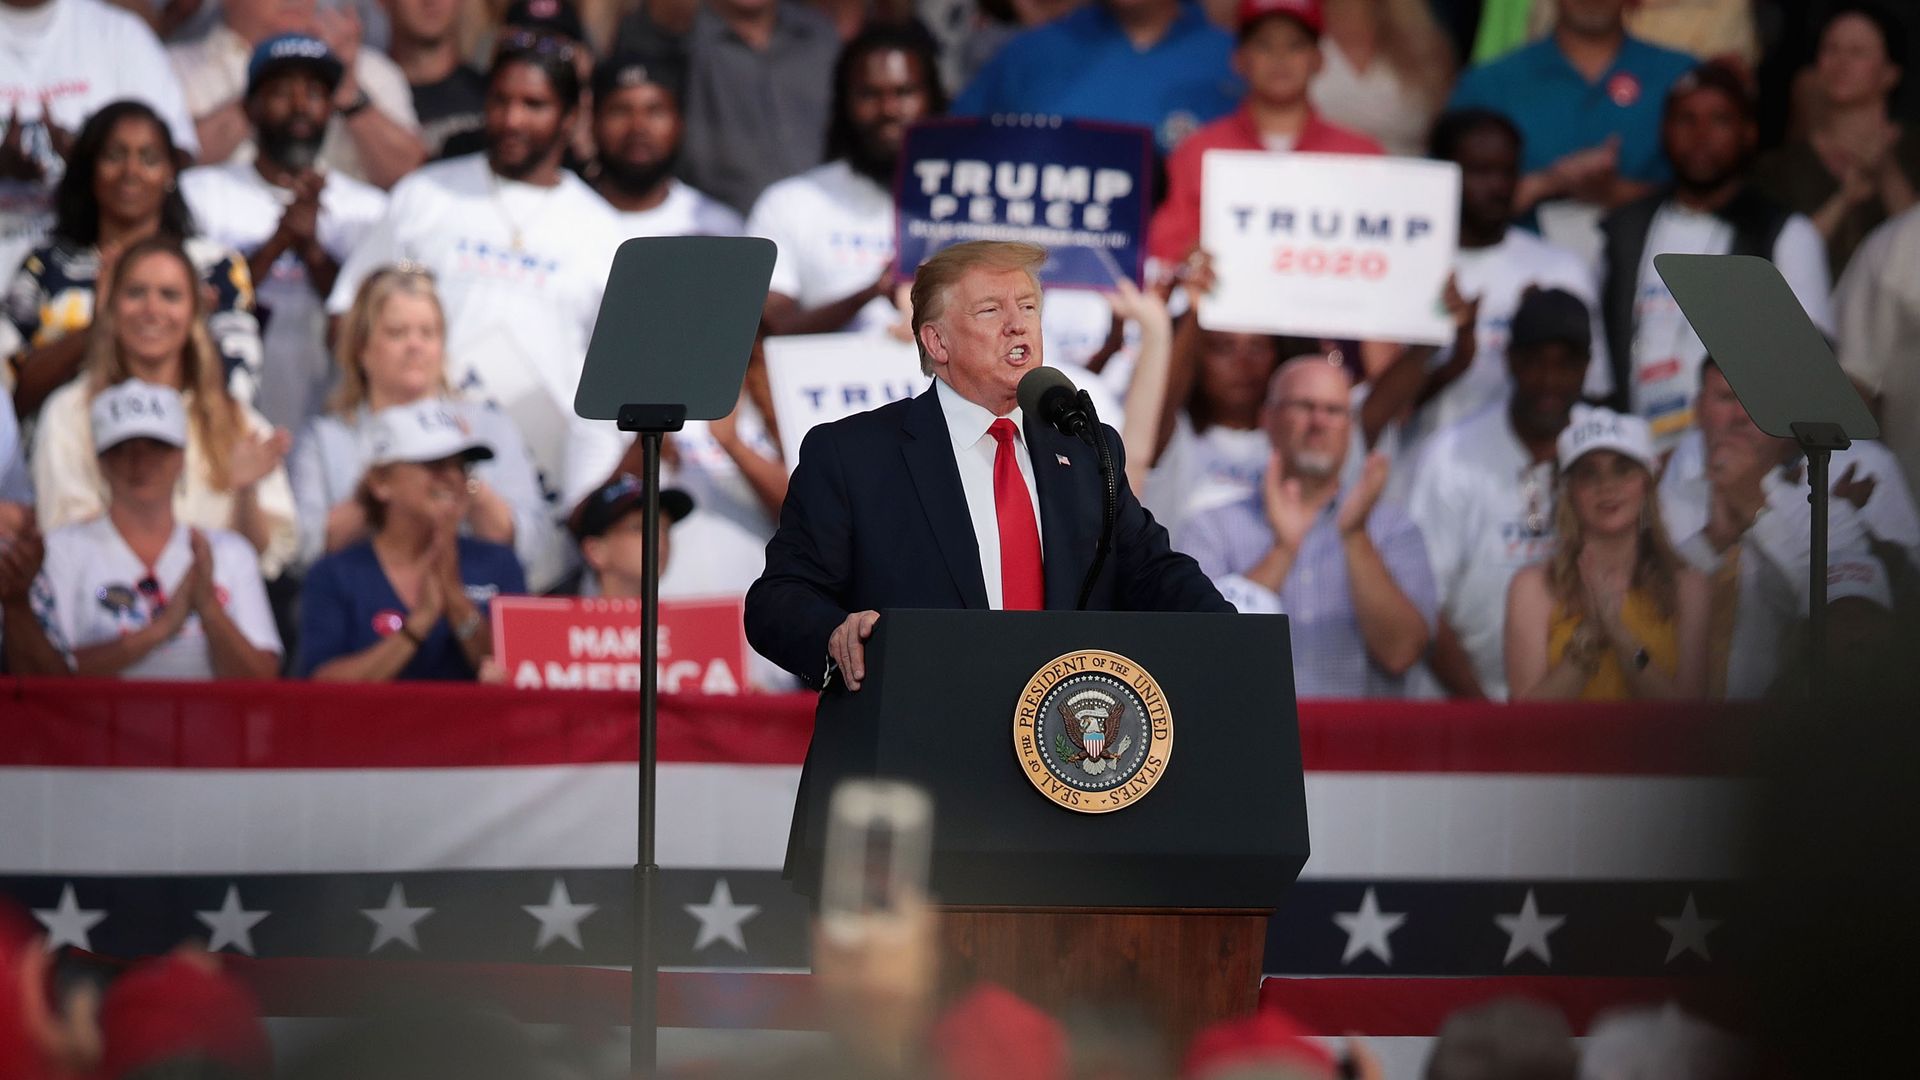 President Trump at a rally in Florida.